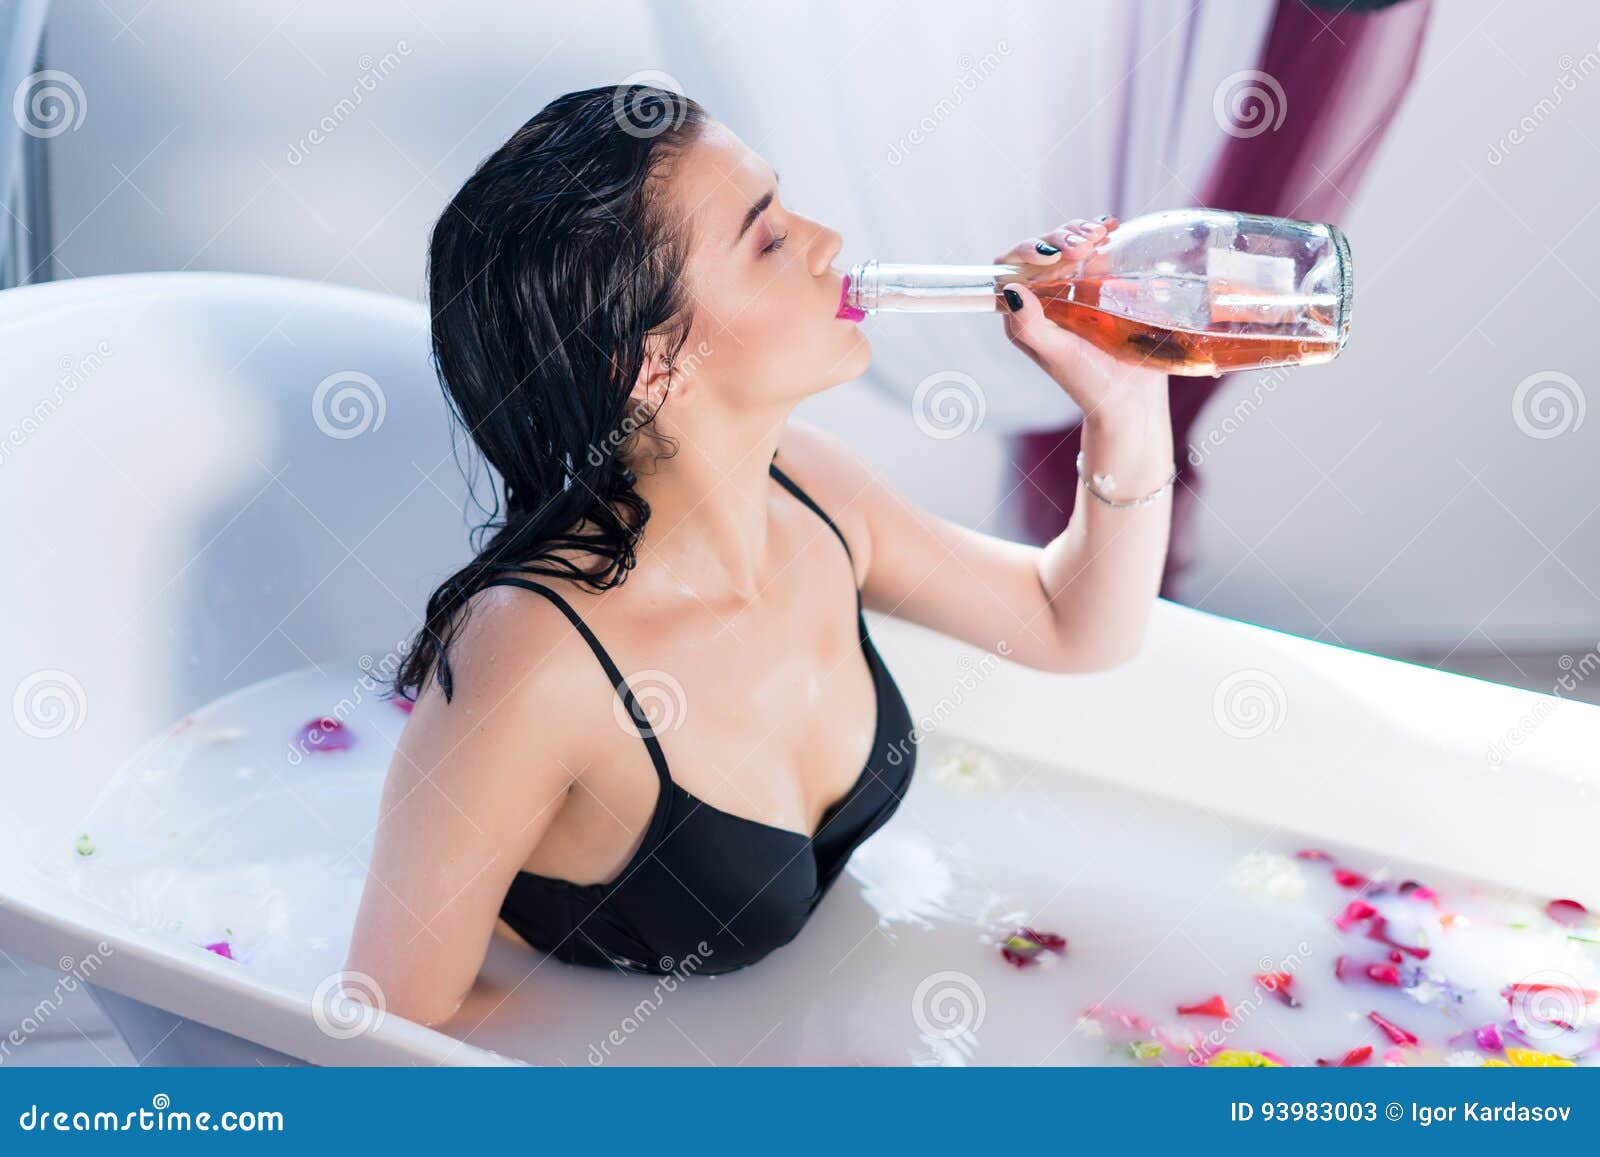 Brunette Woman Drinking Champagne while Taking Hot Bath Stock Image image